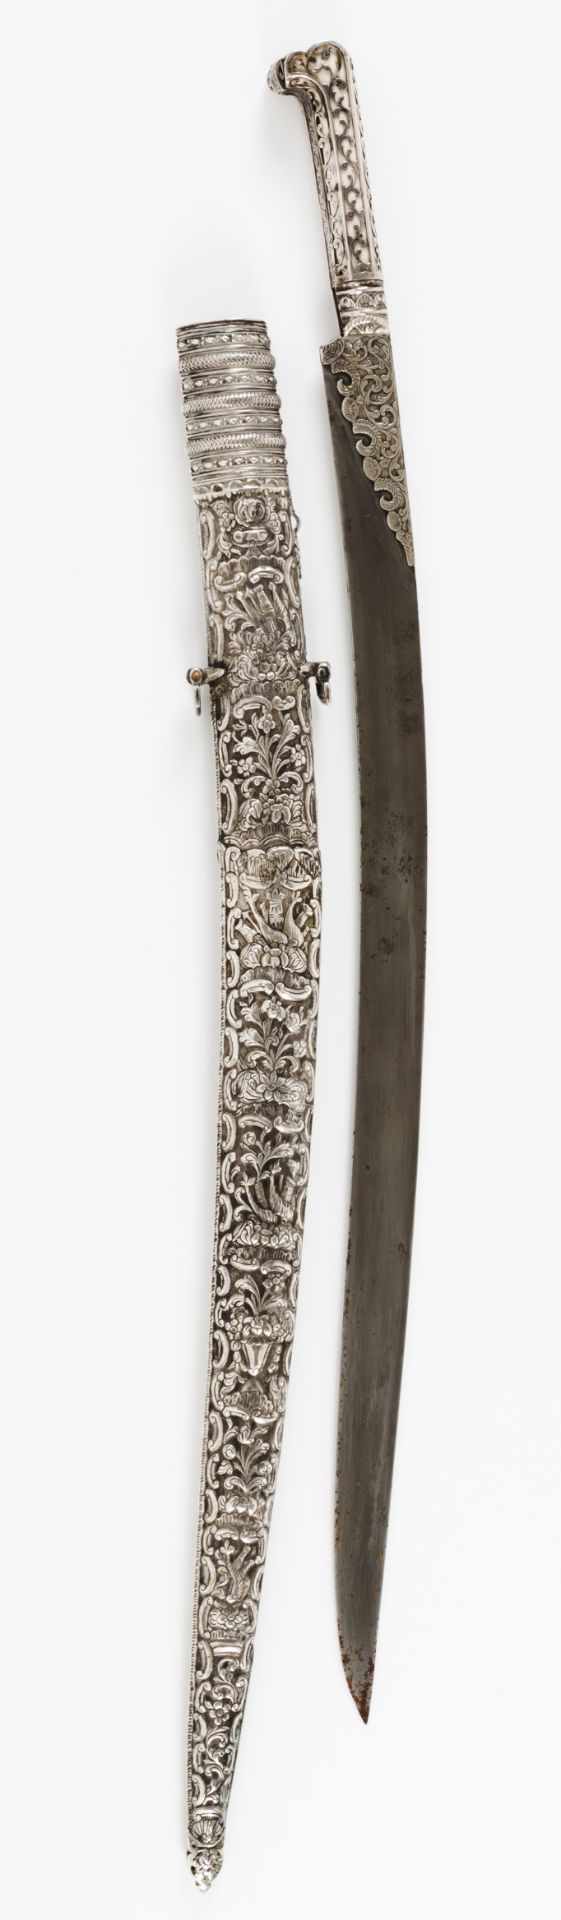 An Ottoman iataghanOttoman silver Camel bone hilt of scalloped and raised applied silver - Image 3 of 6